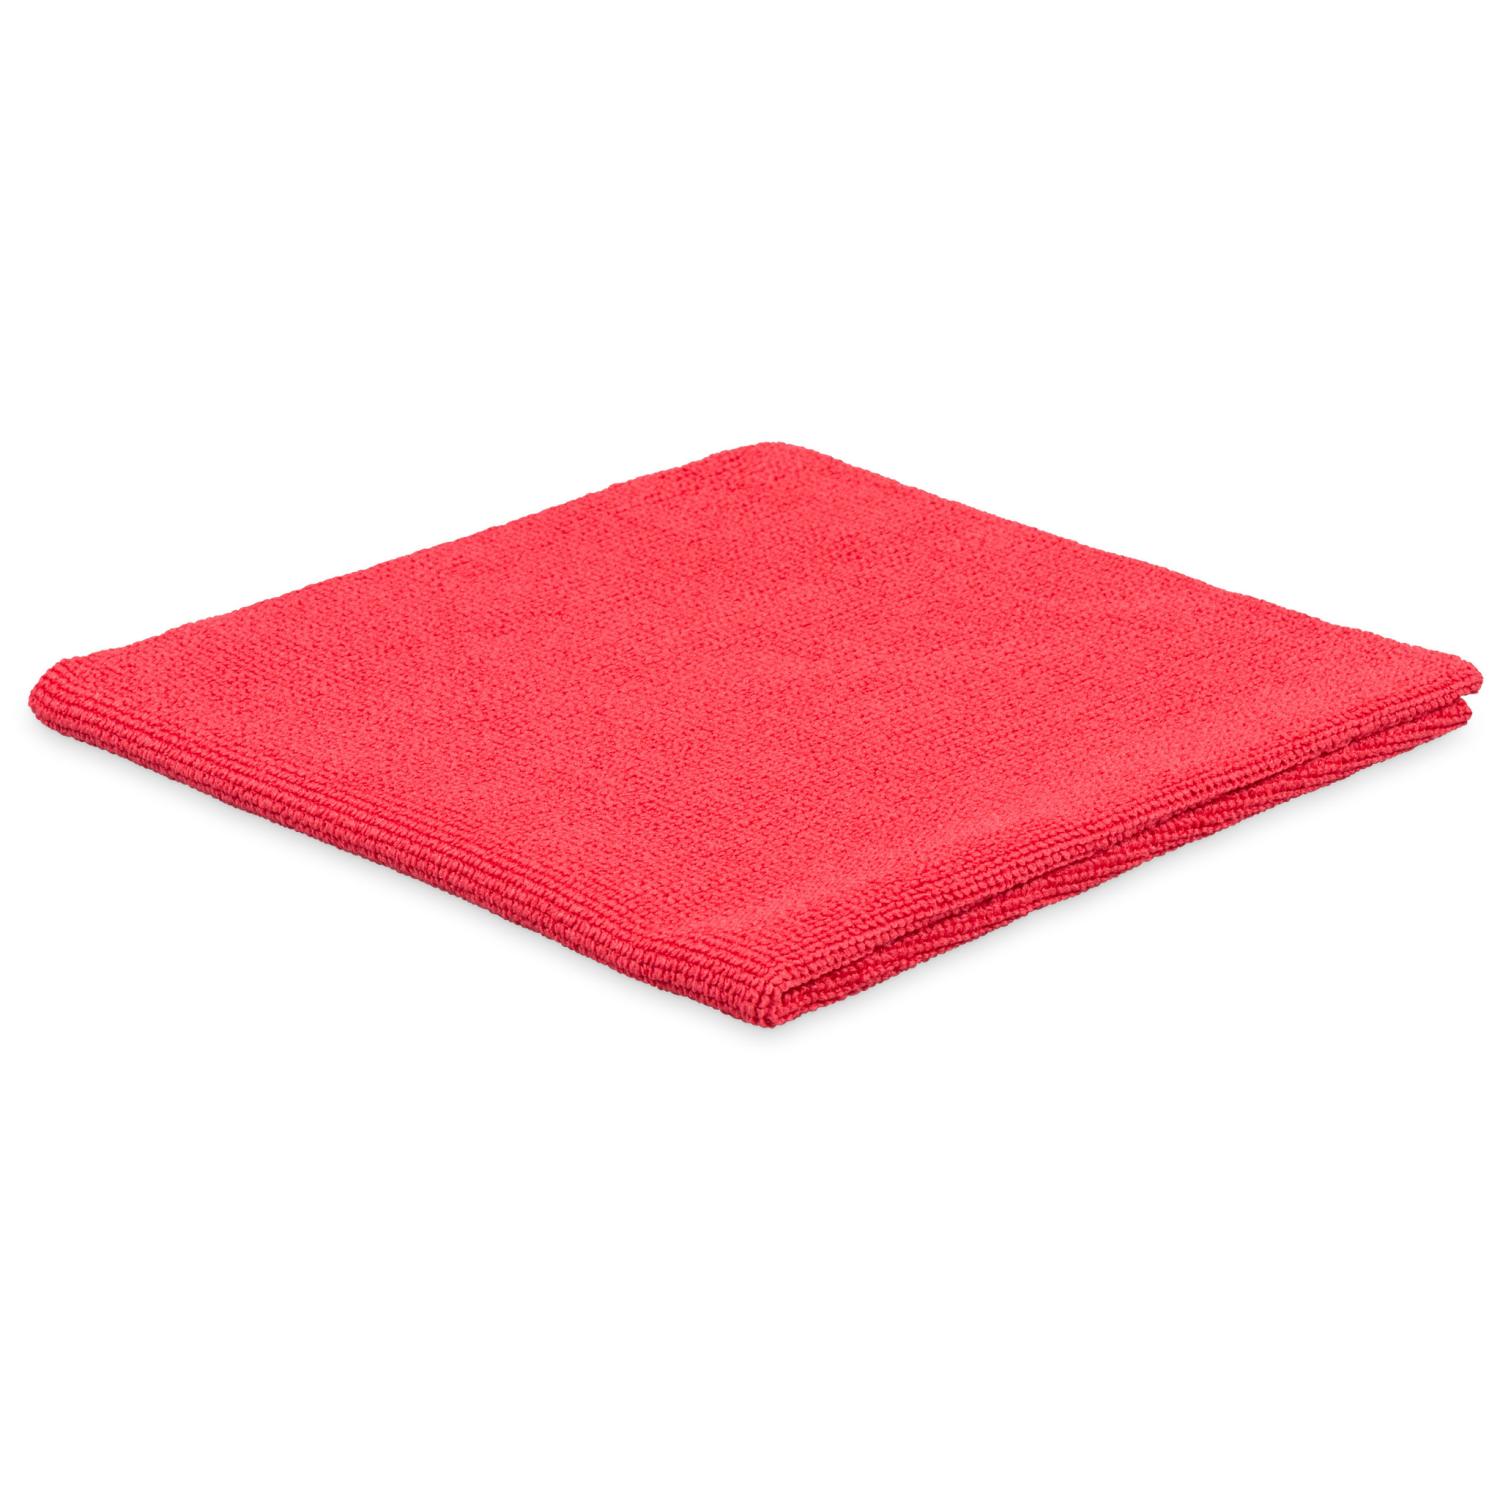 Seamless Microfibre Tricot Laser Red, 320gsm, 40x40 cm 5-Pack.